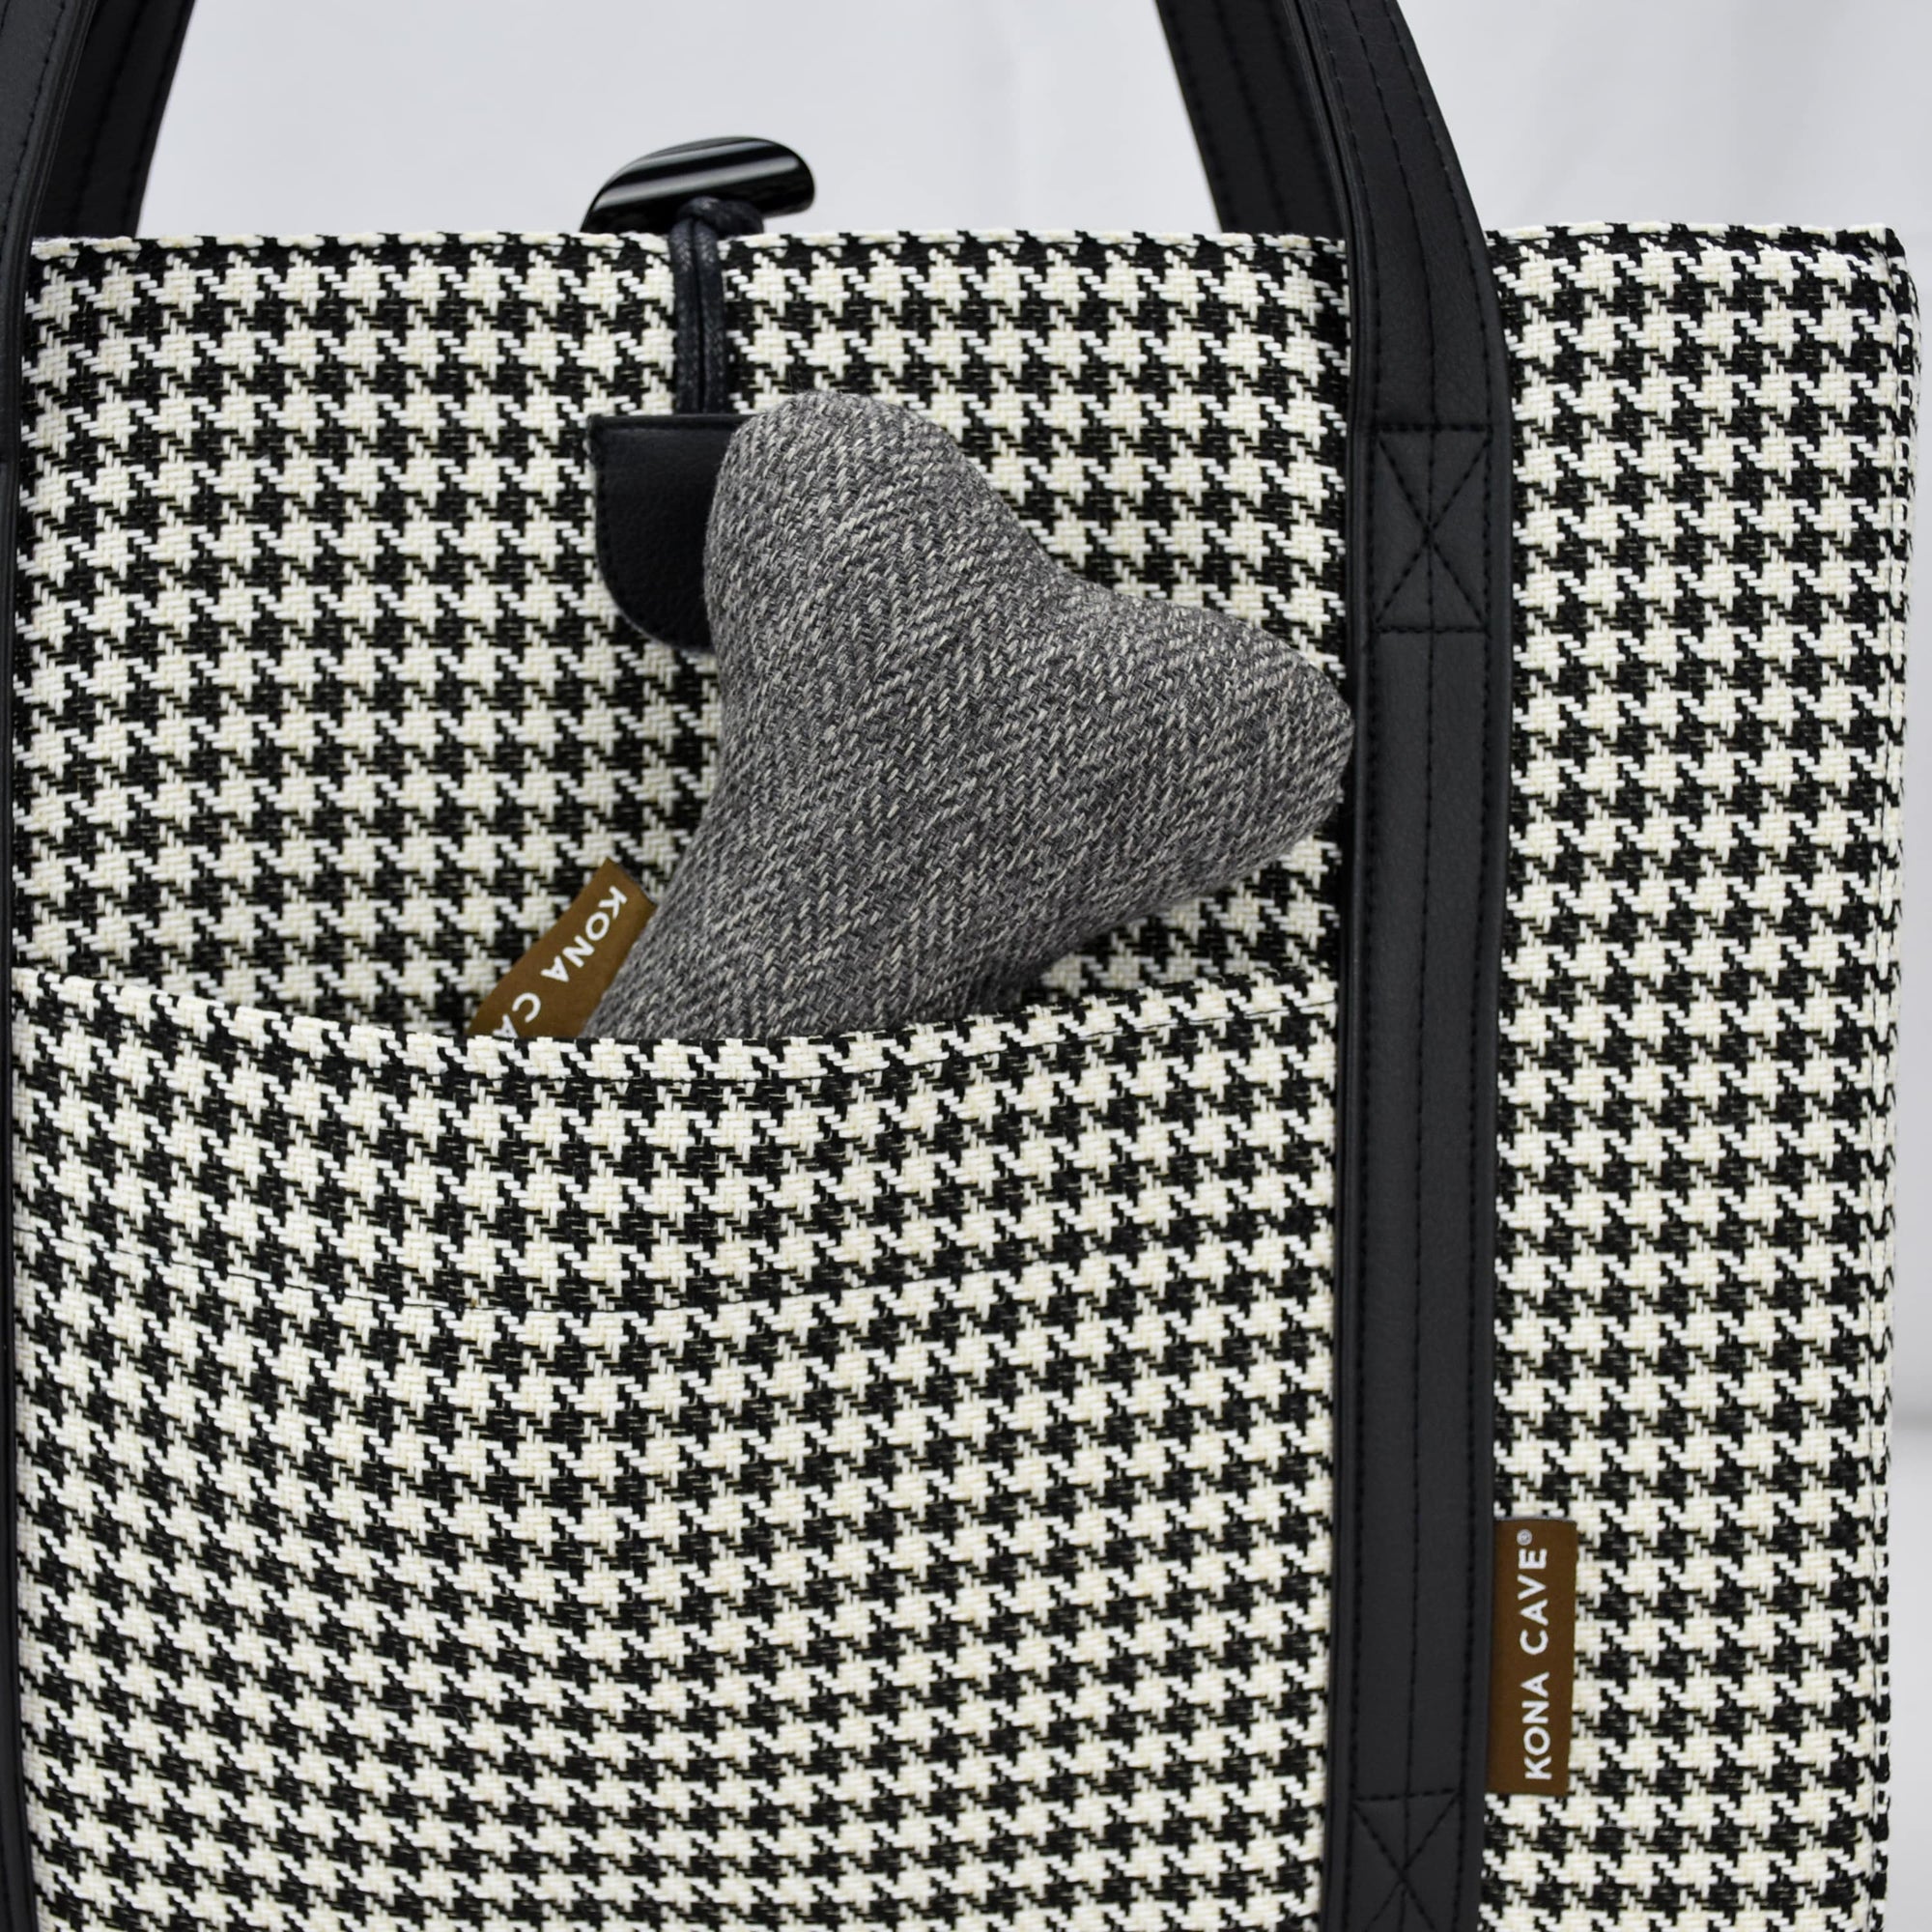 KONA CAVE® luxury Travel Dog Bed - Black and White Houndstooth with Black Quilted Alcantara faux suede lining, with front pocket for on-the-go dog essentials, vegan-leather shoulder straps, and toggle closure.  Portable, folded dog mat for restaurants, outside and hotels. City chic carried dog bed . Luxury toy dog bone in pocket. 